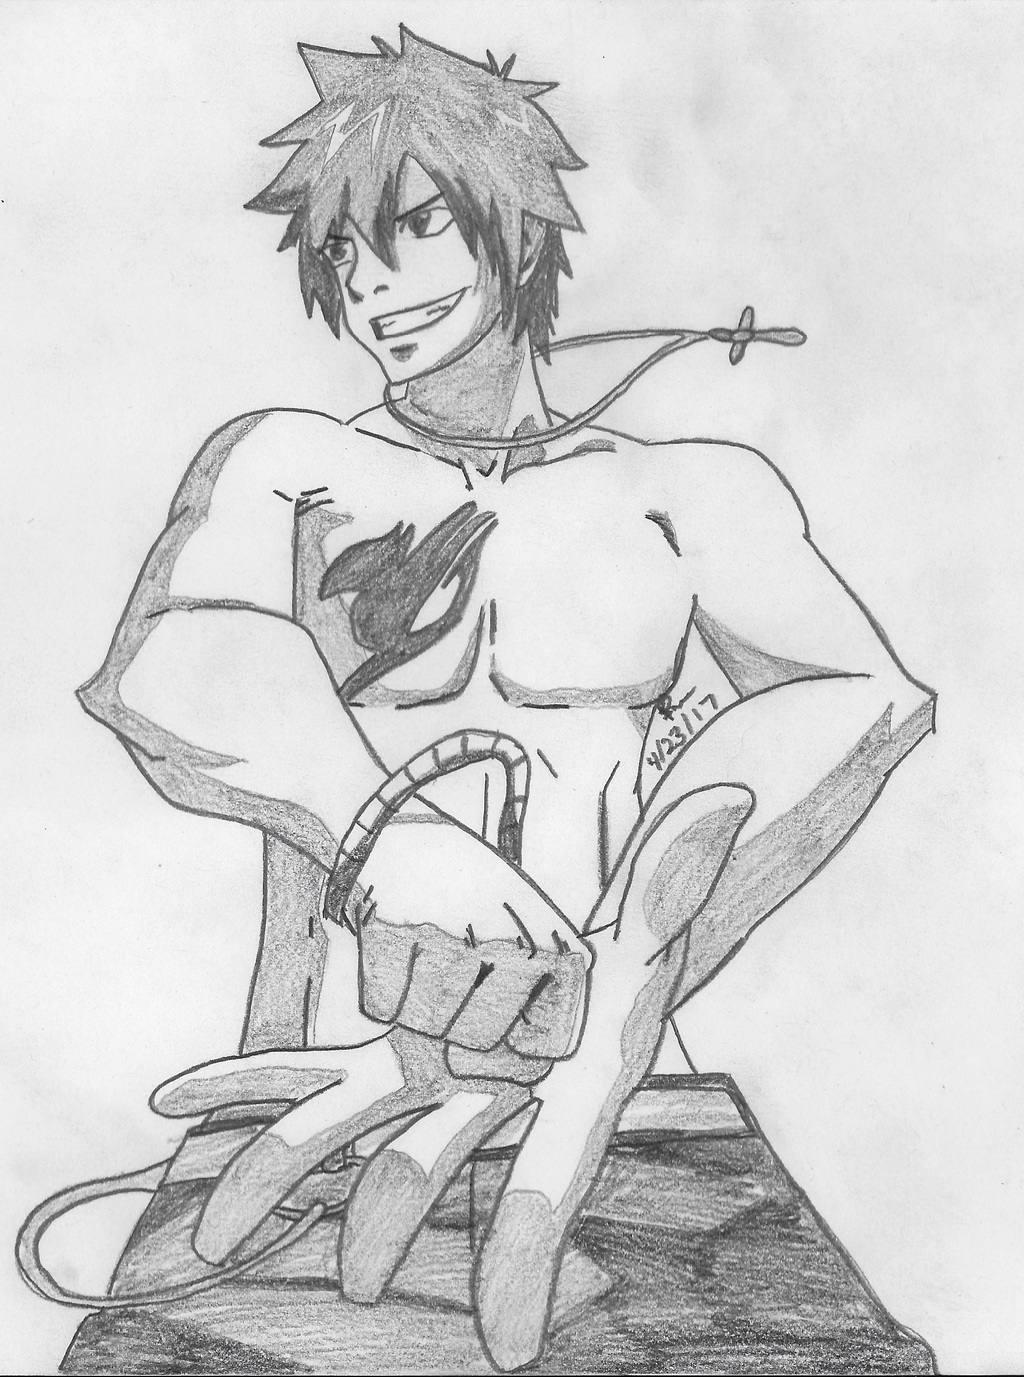 Most recent image: Grey Fullbuster